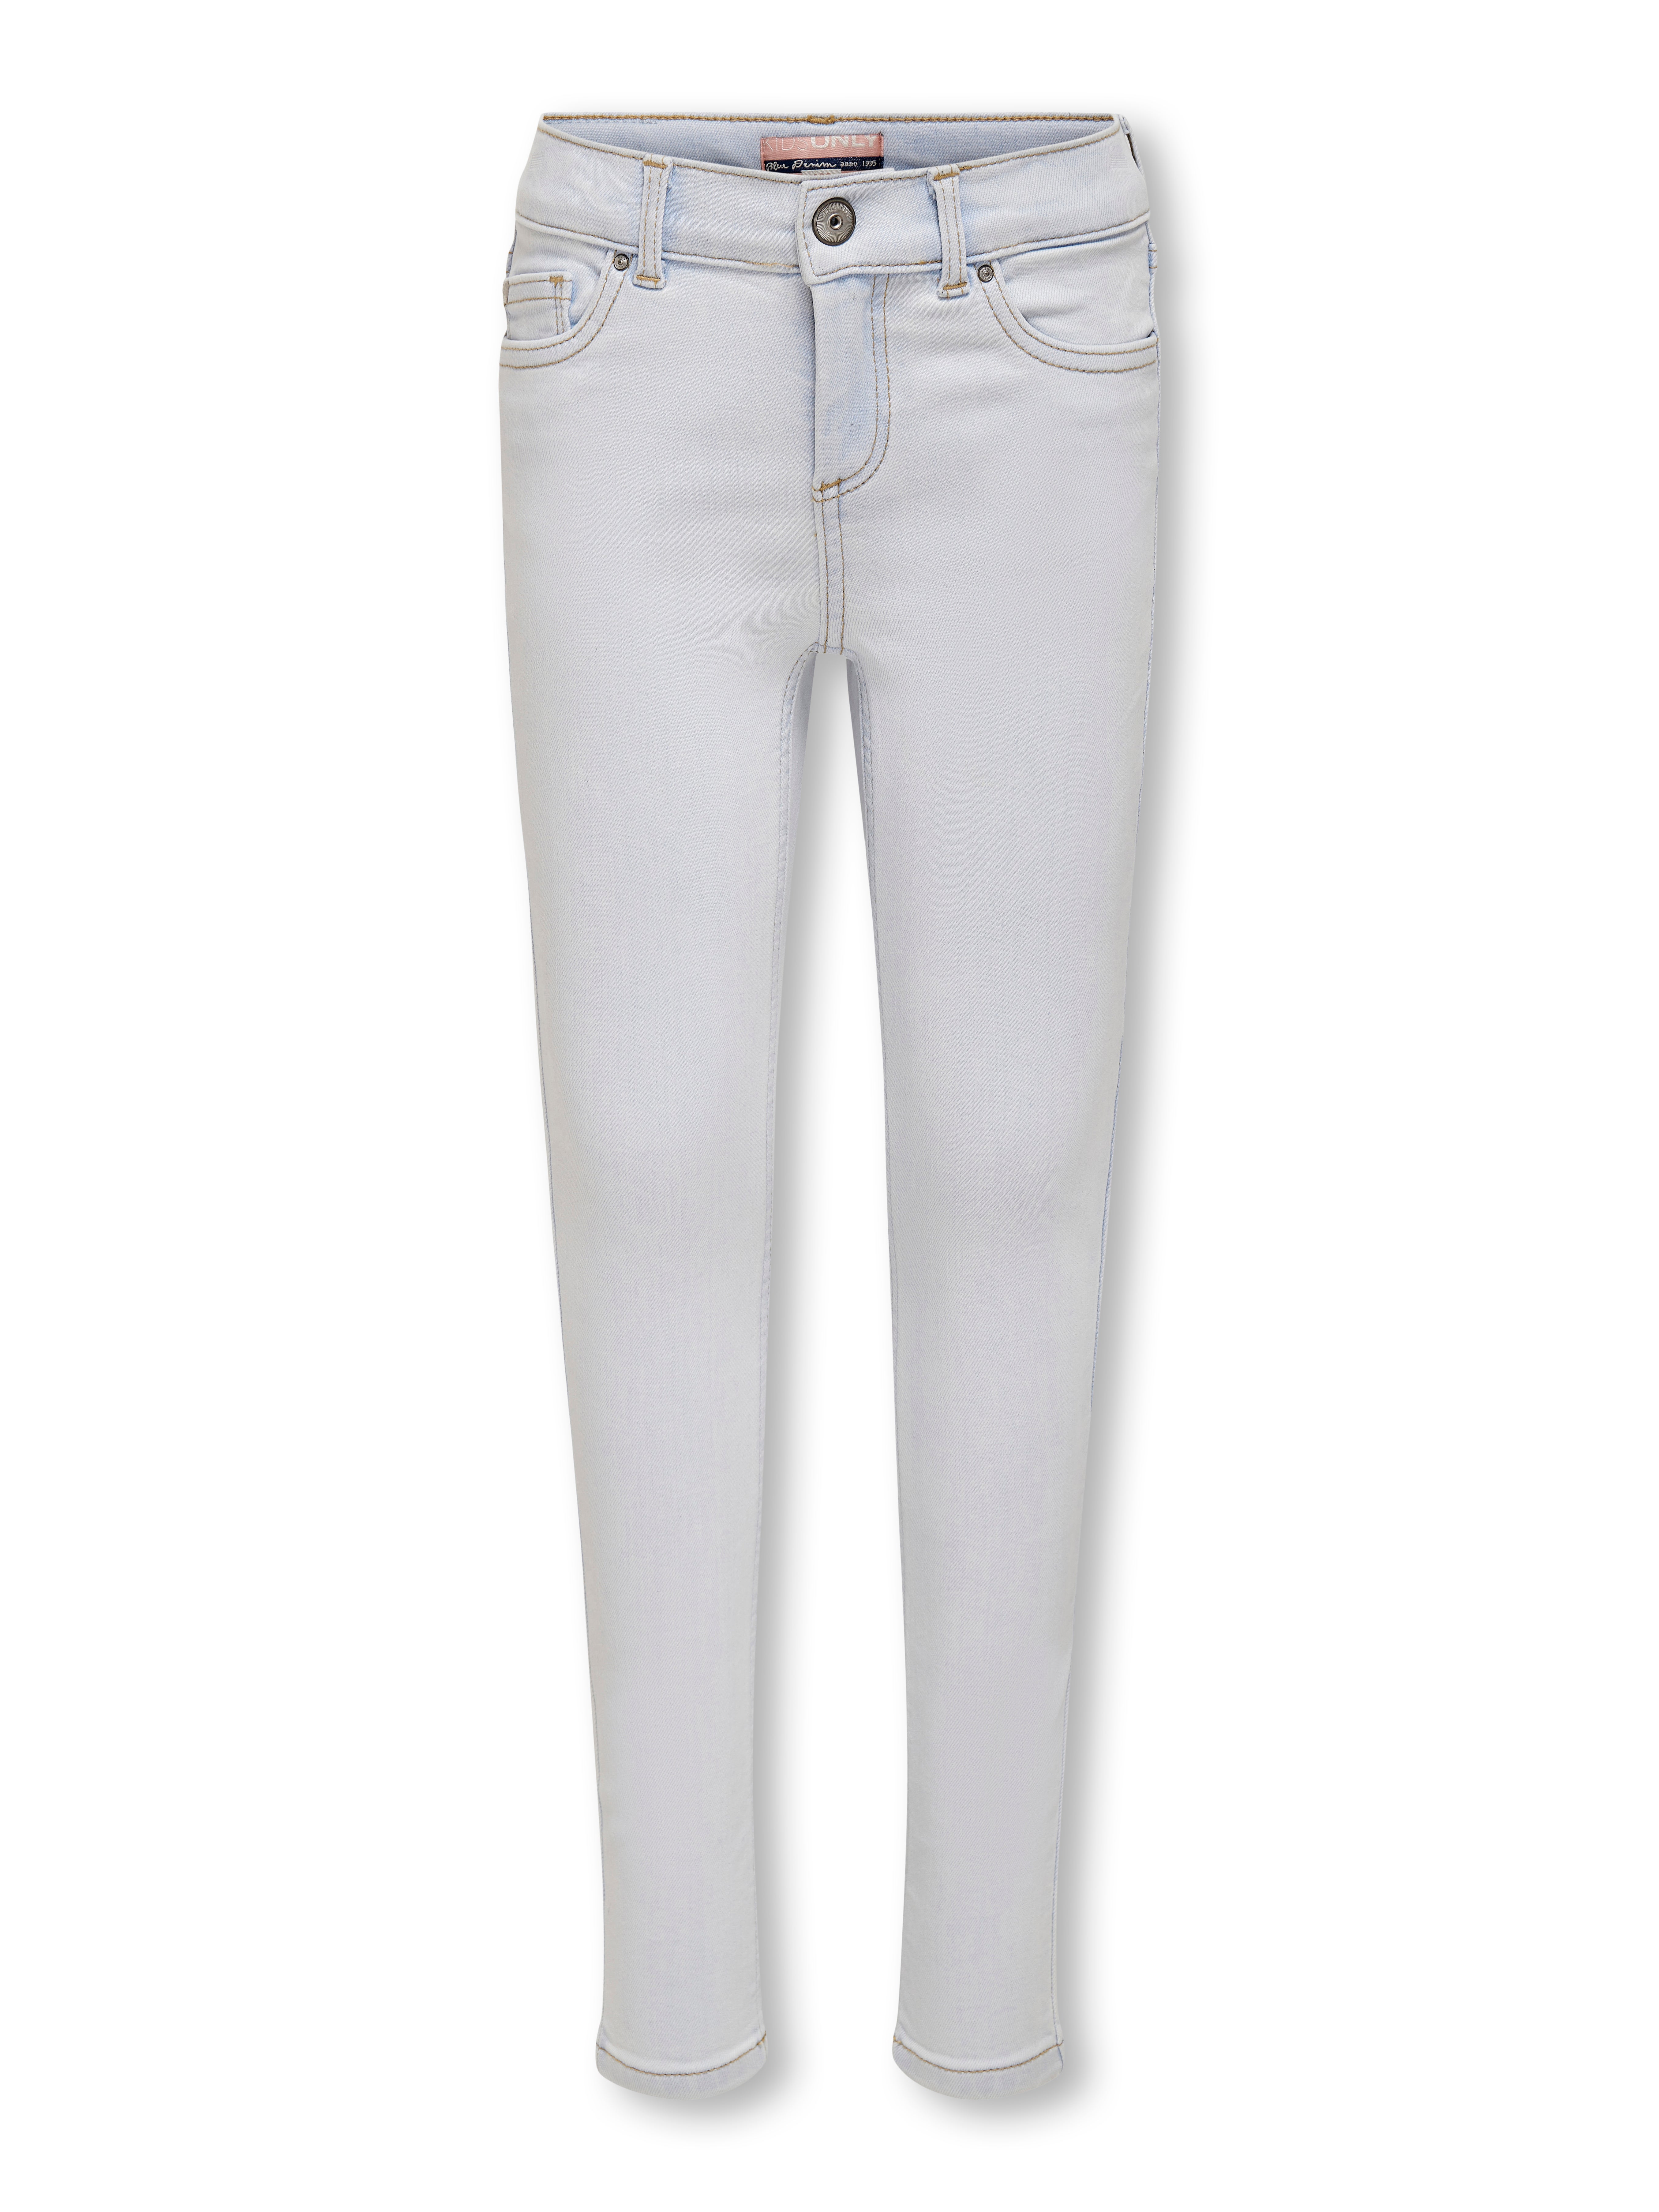 Briljant bevel douche KONBlush Skinny fit jeans with 30% discount! | ONLY®